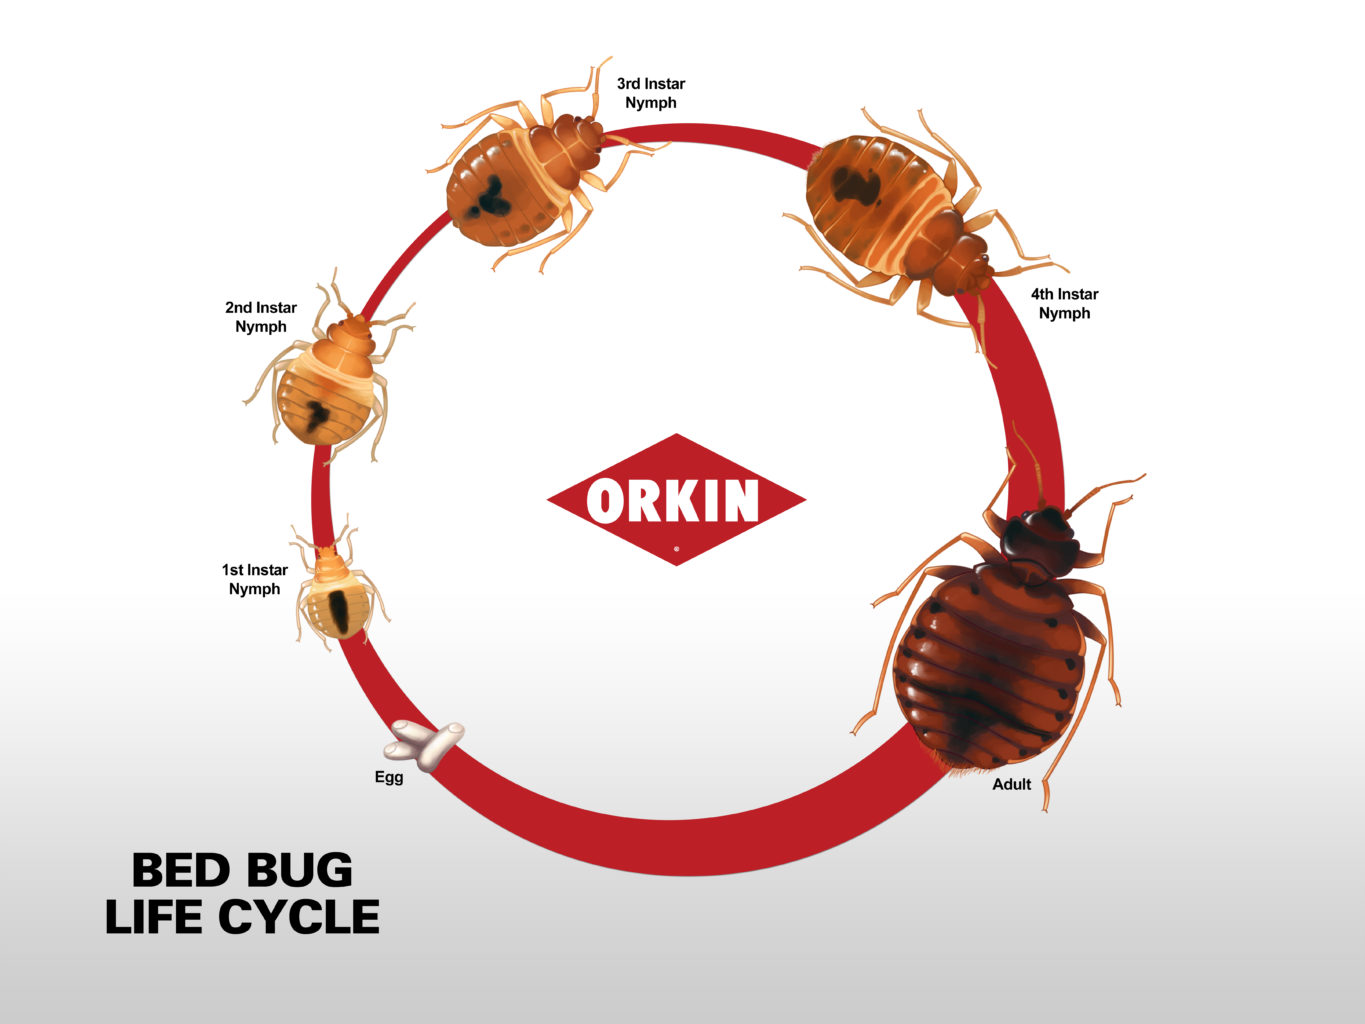 Image showing the different stages of a bed bugs life cycle.